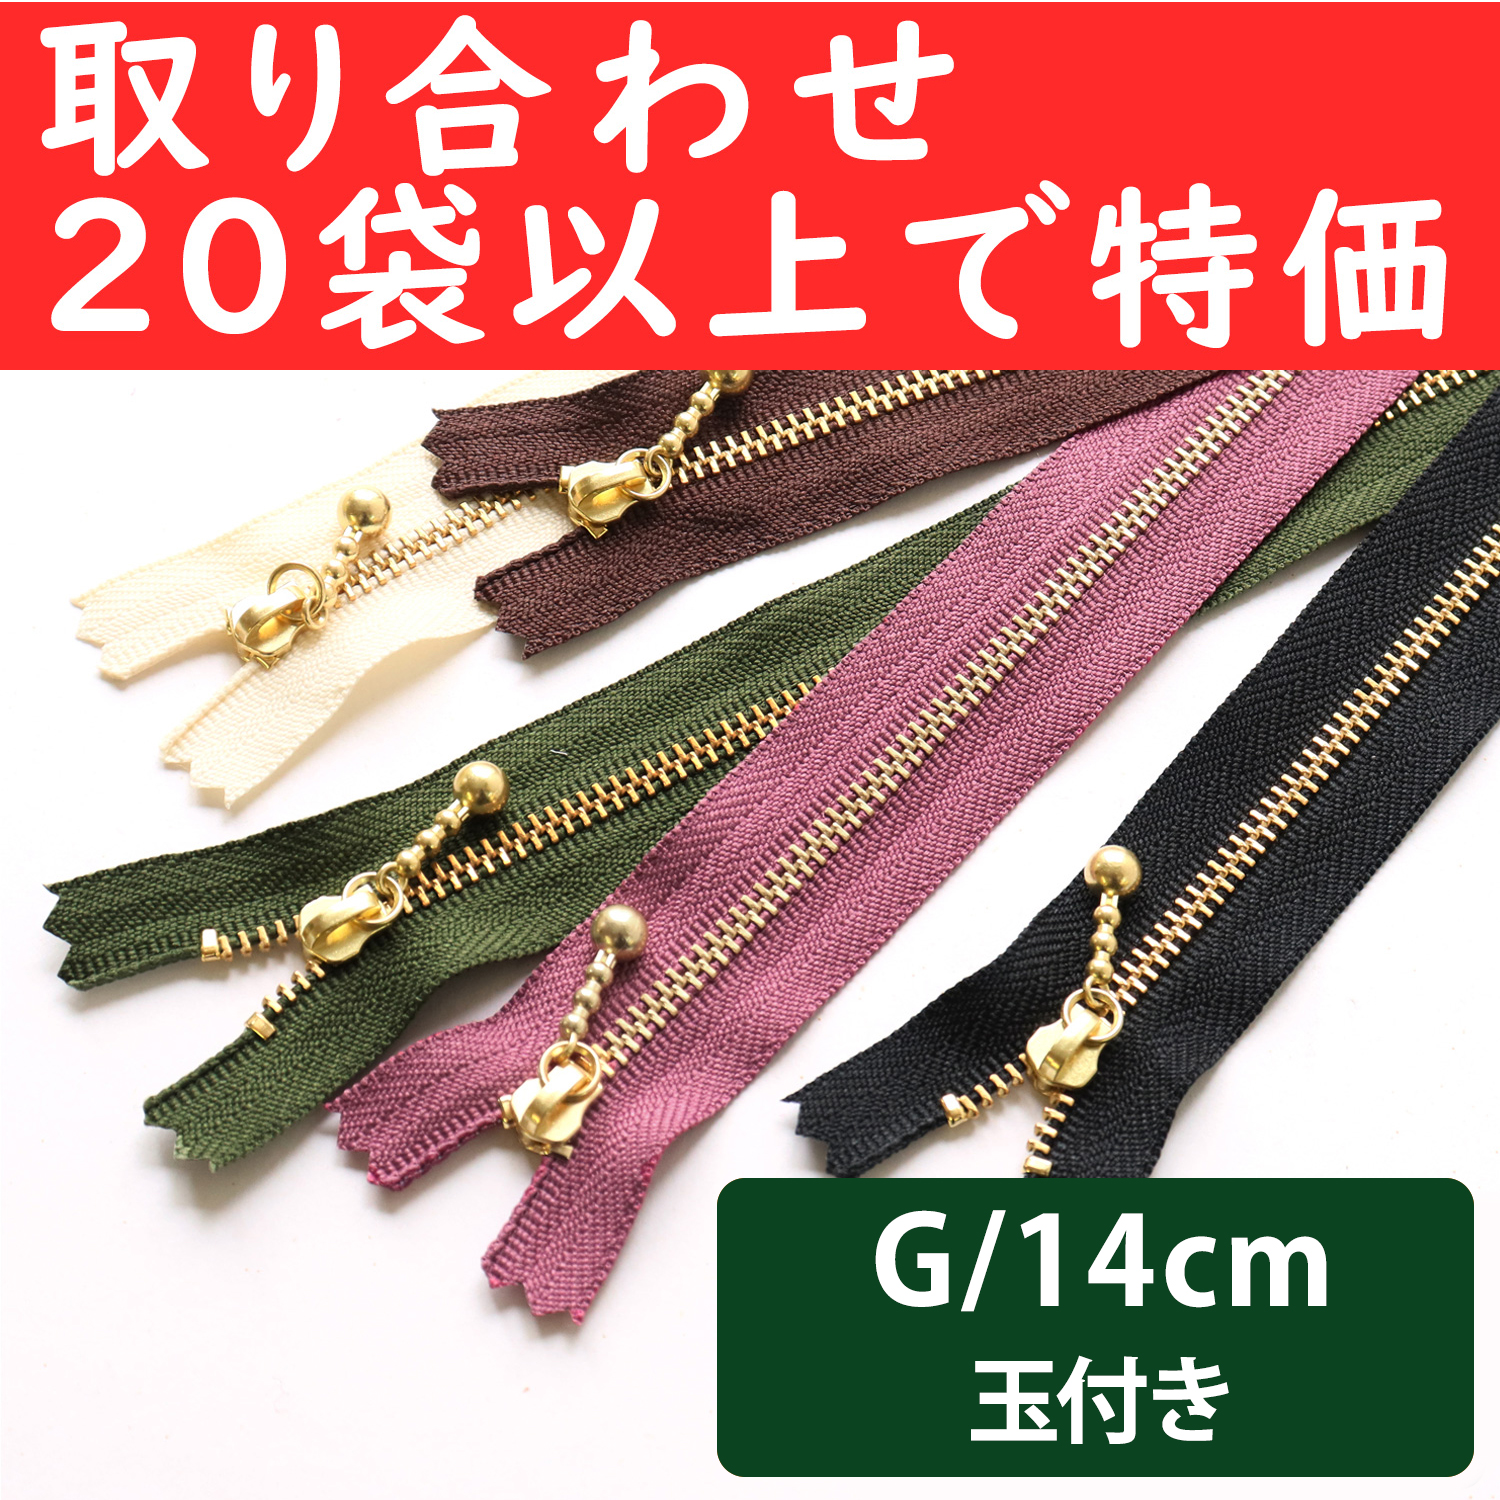 3G14-OVER200 Special)Ball Pull Zippers  G 14cm ", orders with 20 bags or more (bag)